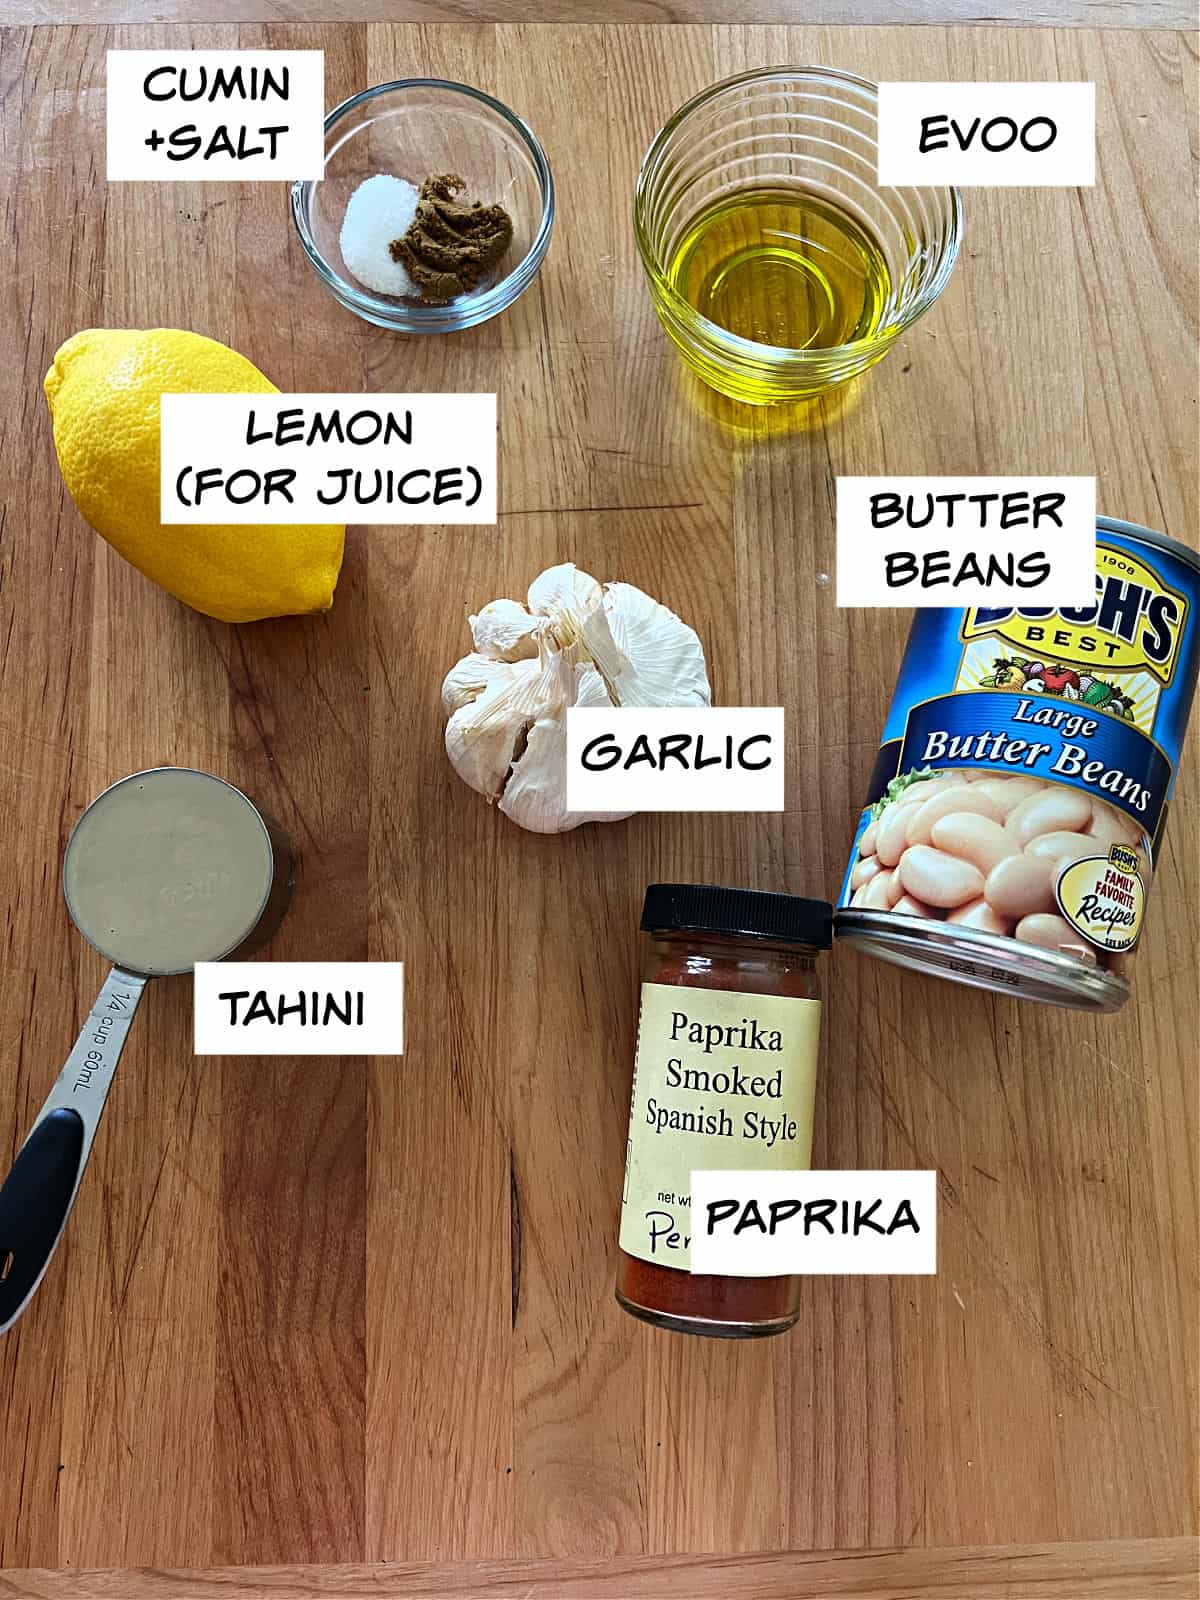 ingredients: lemon, spices, butter beans, garlic, and tahini.